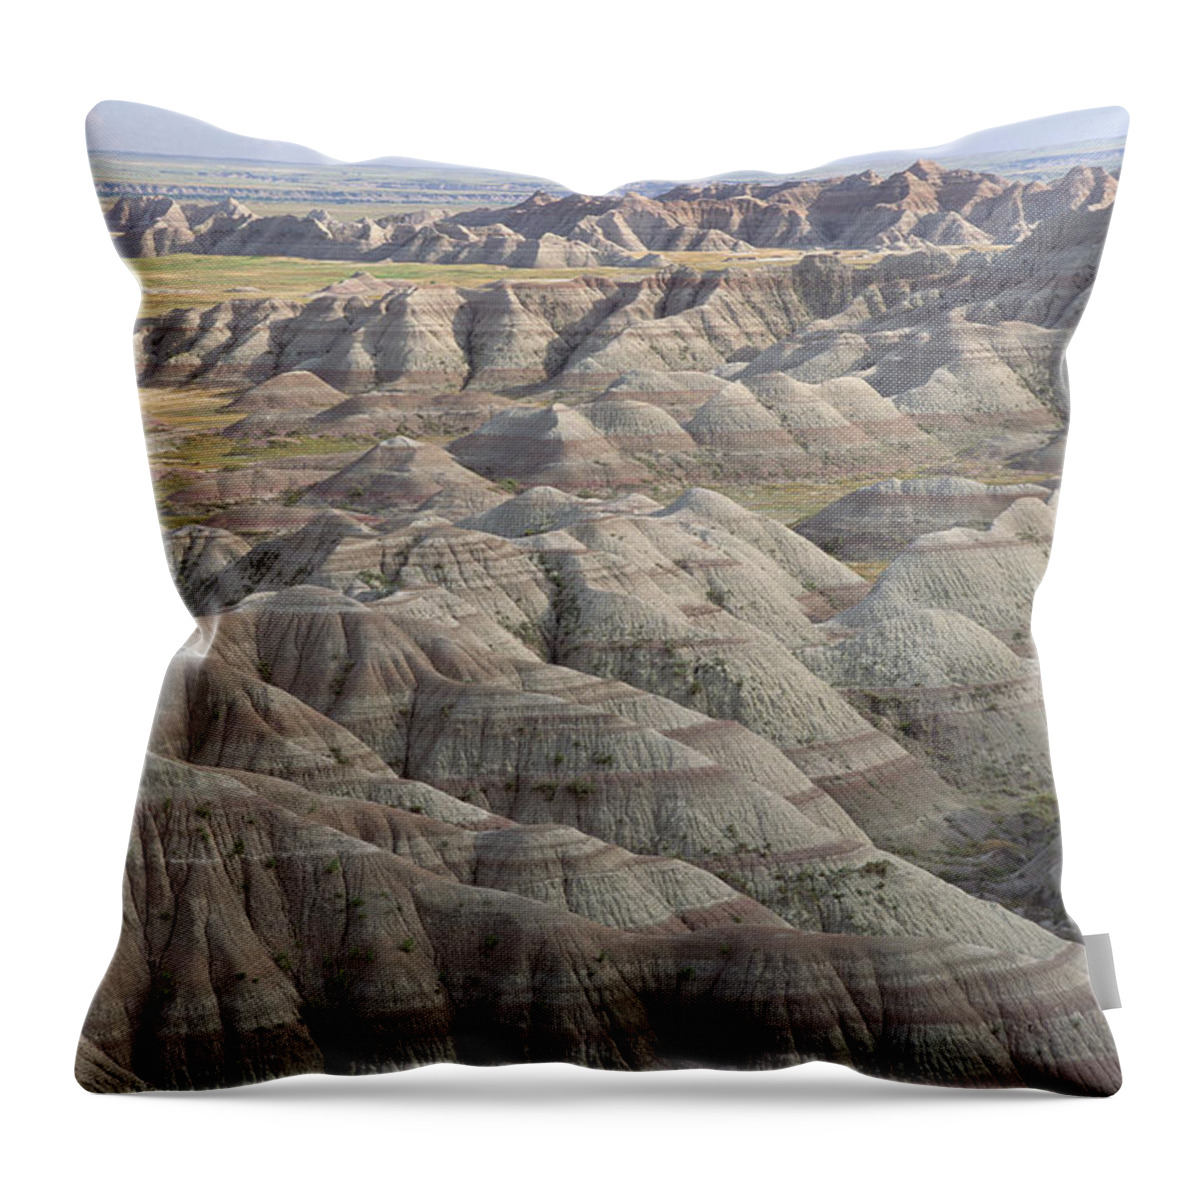 Mp Throw Pillow featuring the photograph Eroded Landscape, Hay Butte, Badlands by Gerry Ellis